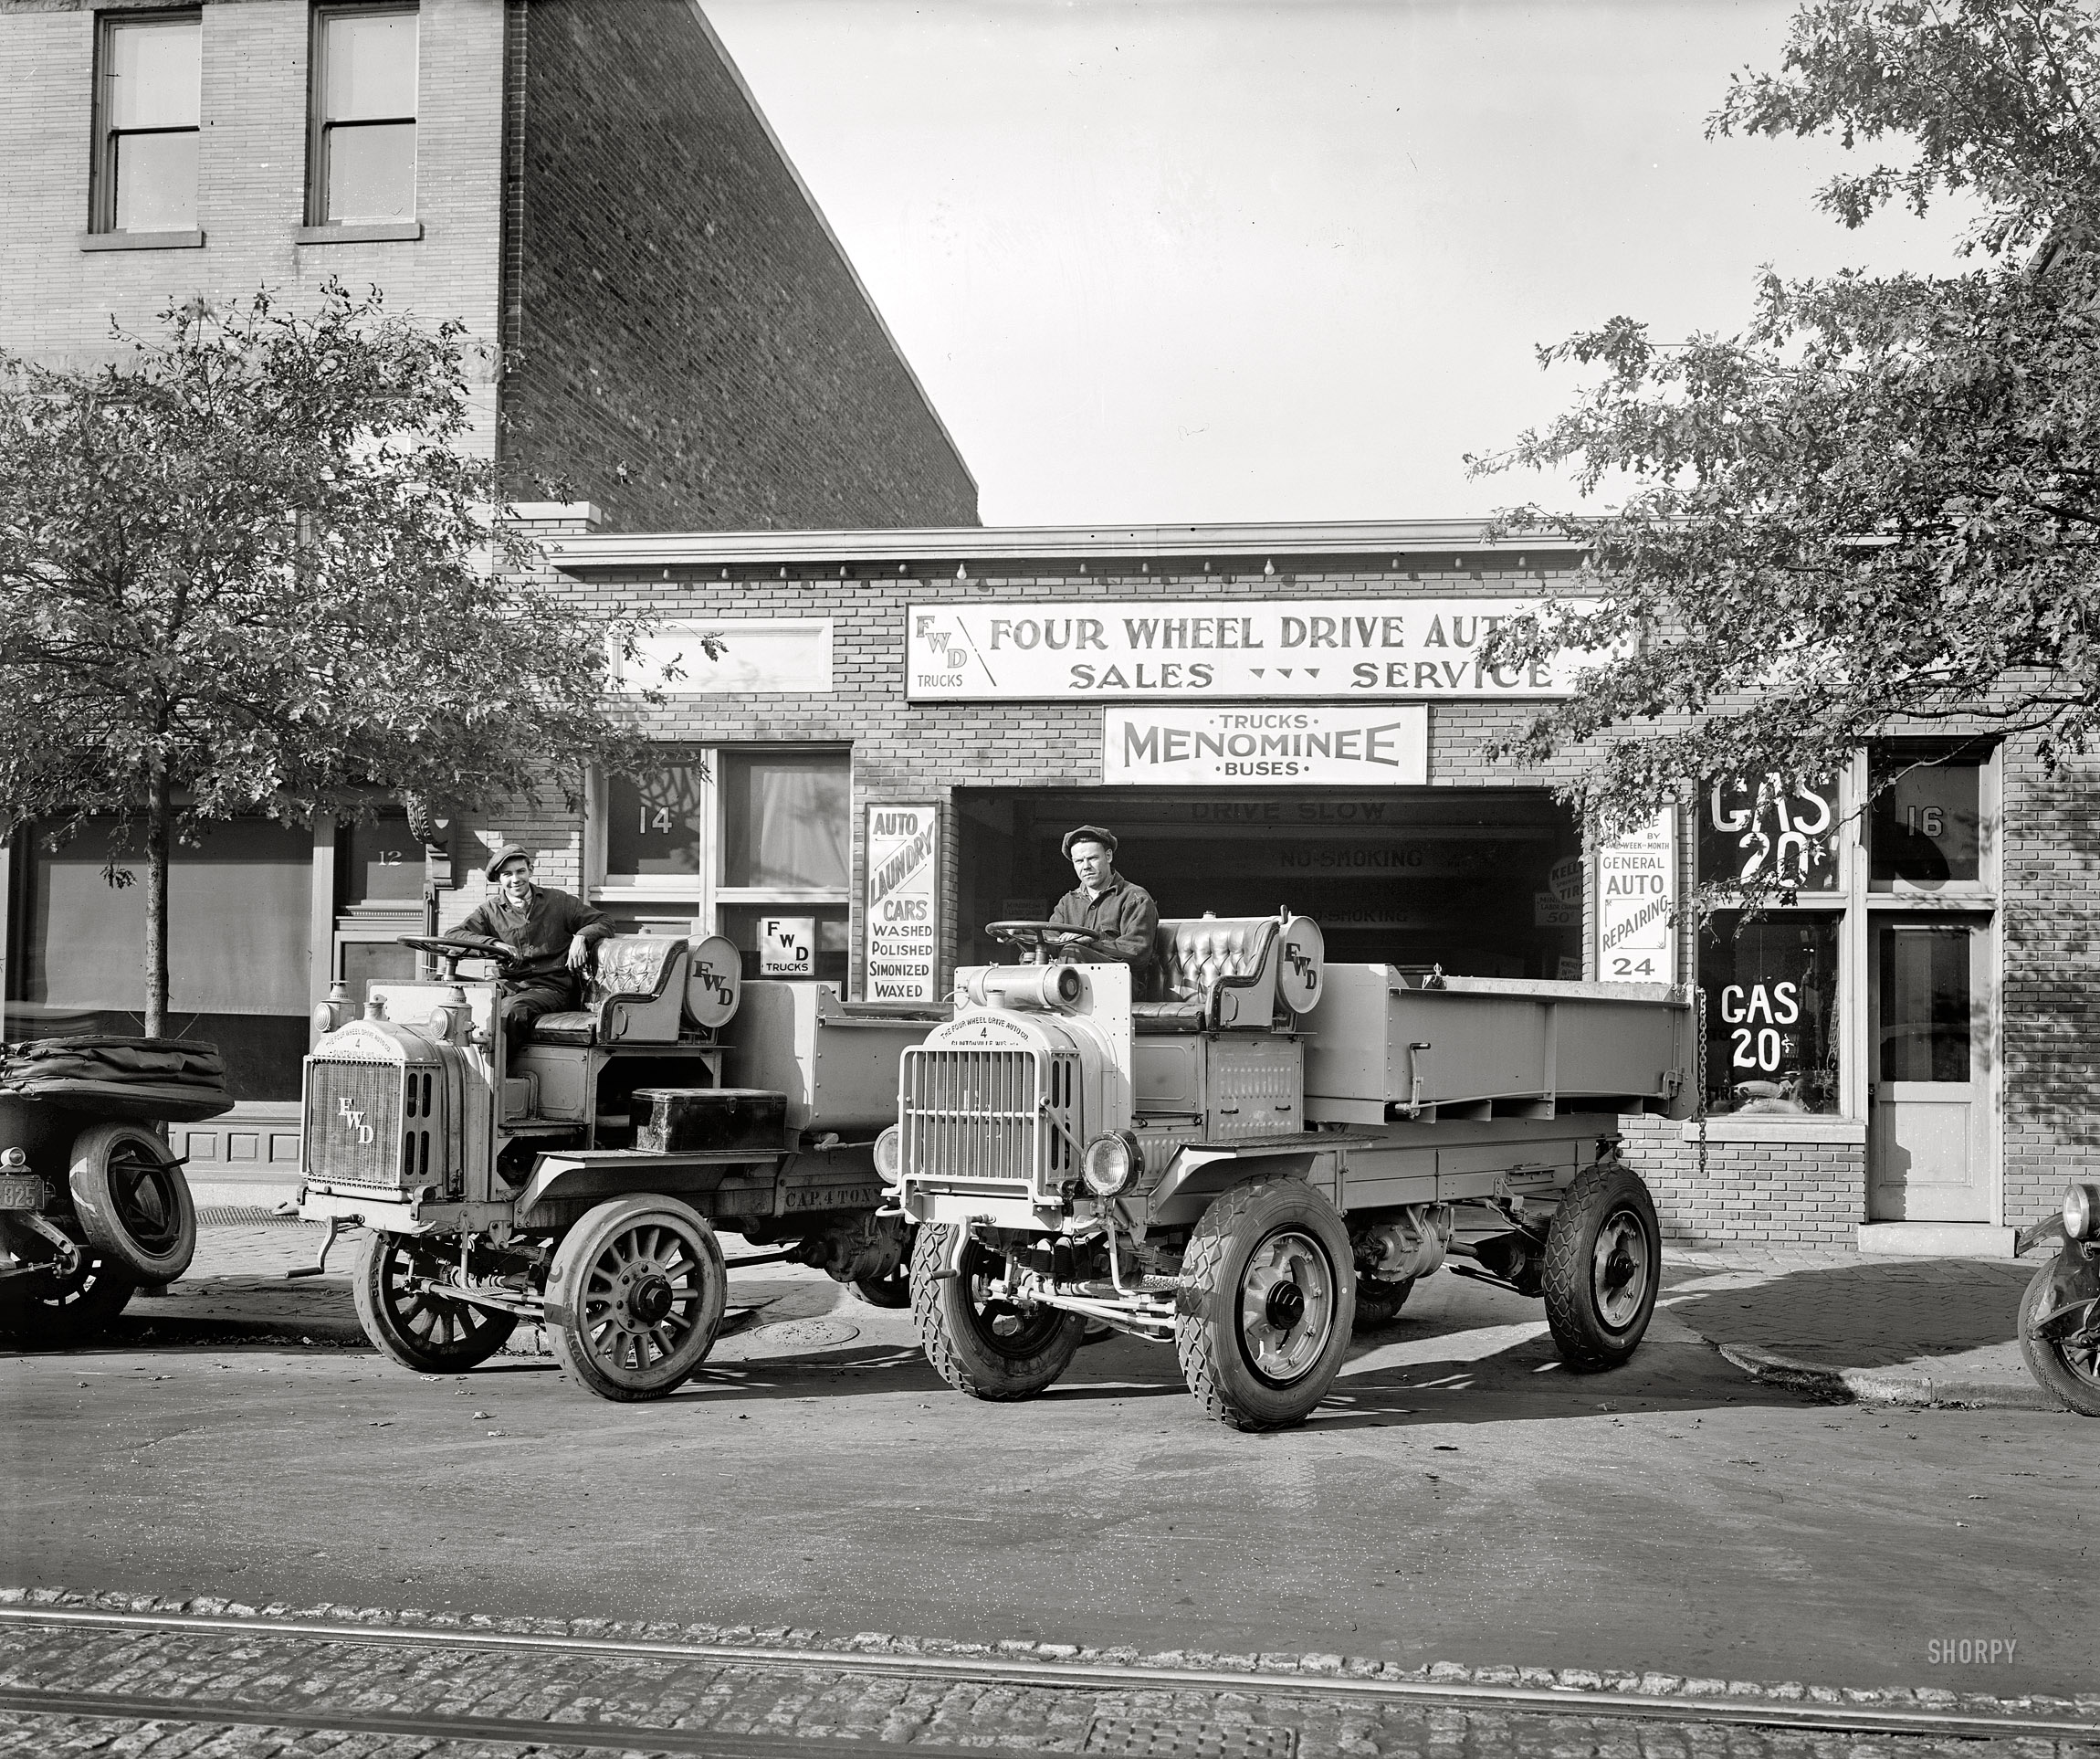 Washington, D.C., circa 1927. "Four Wheel Drive Auto Co." Our second look at FWD's big lugs. National Photo Co. Collection glass negative. View full size.